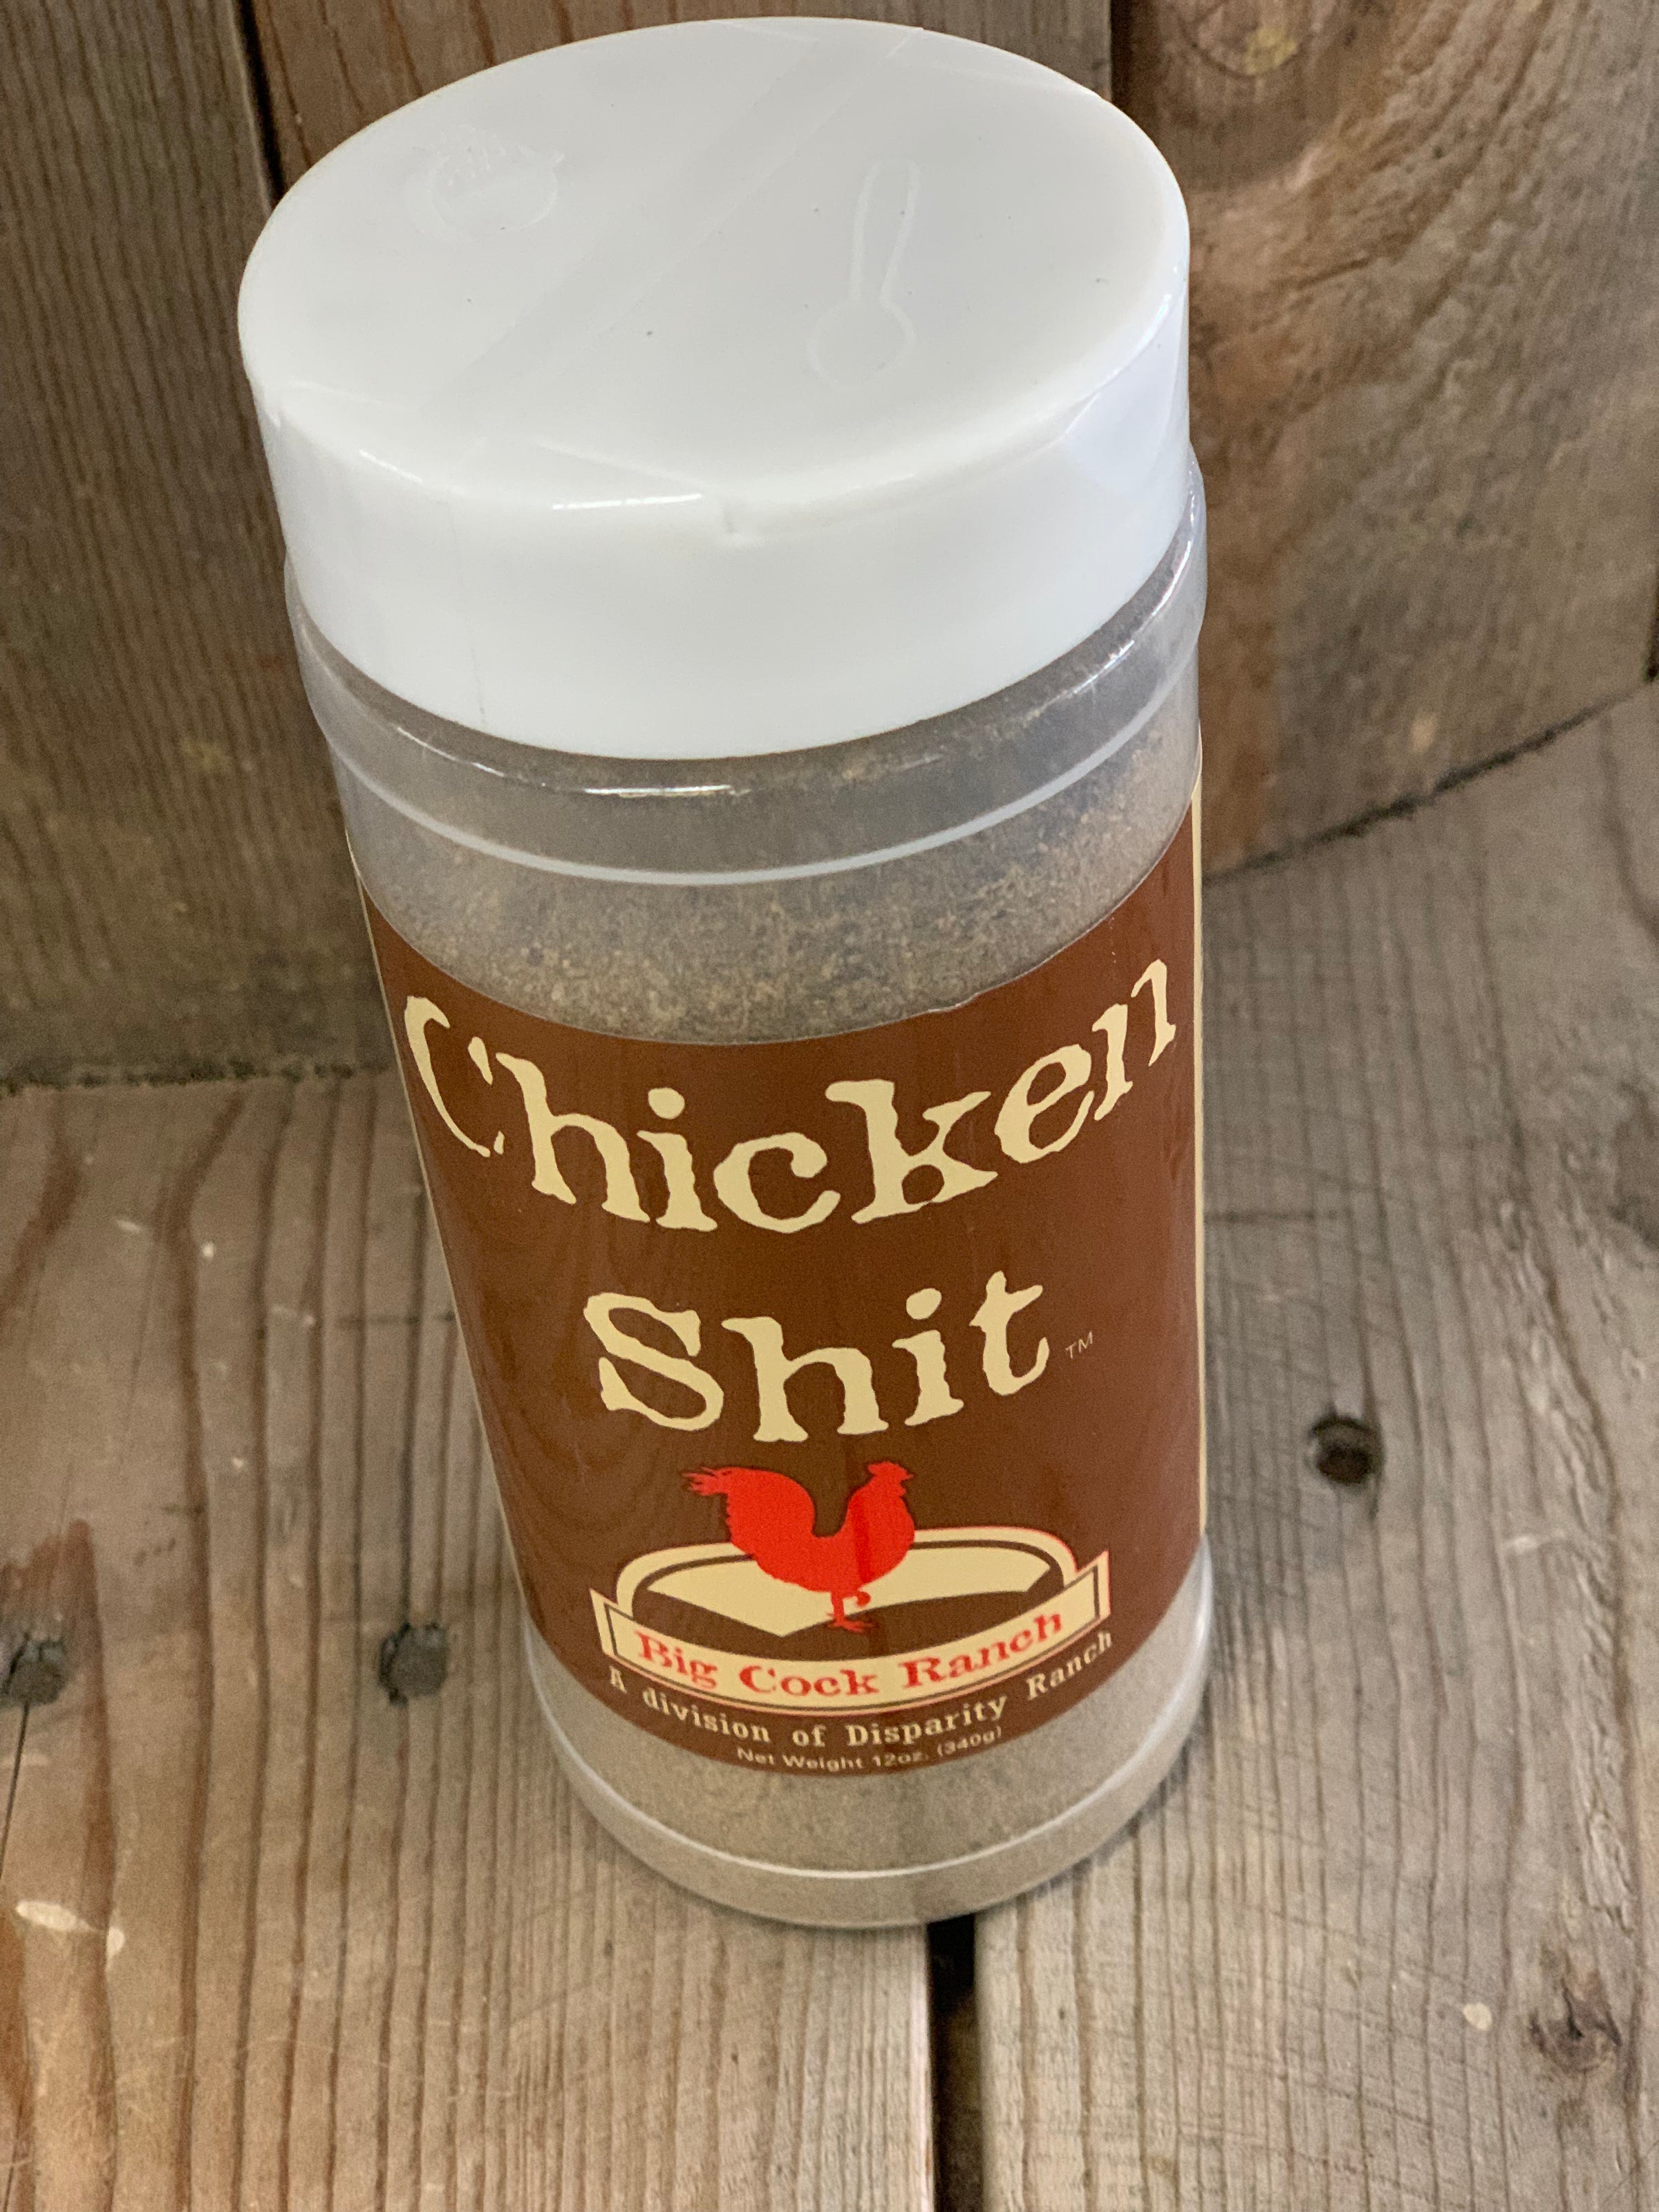 Chicken Shit Poultry Seasoning – 56 FEED CO